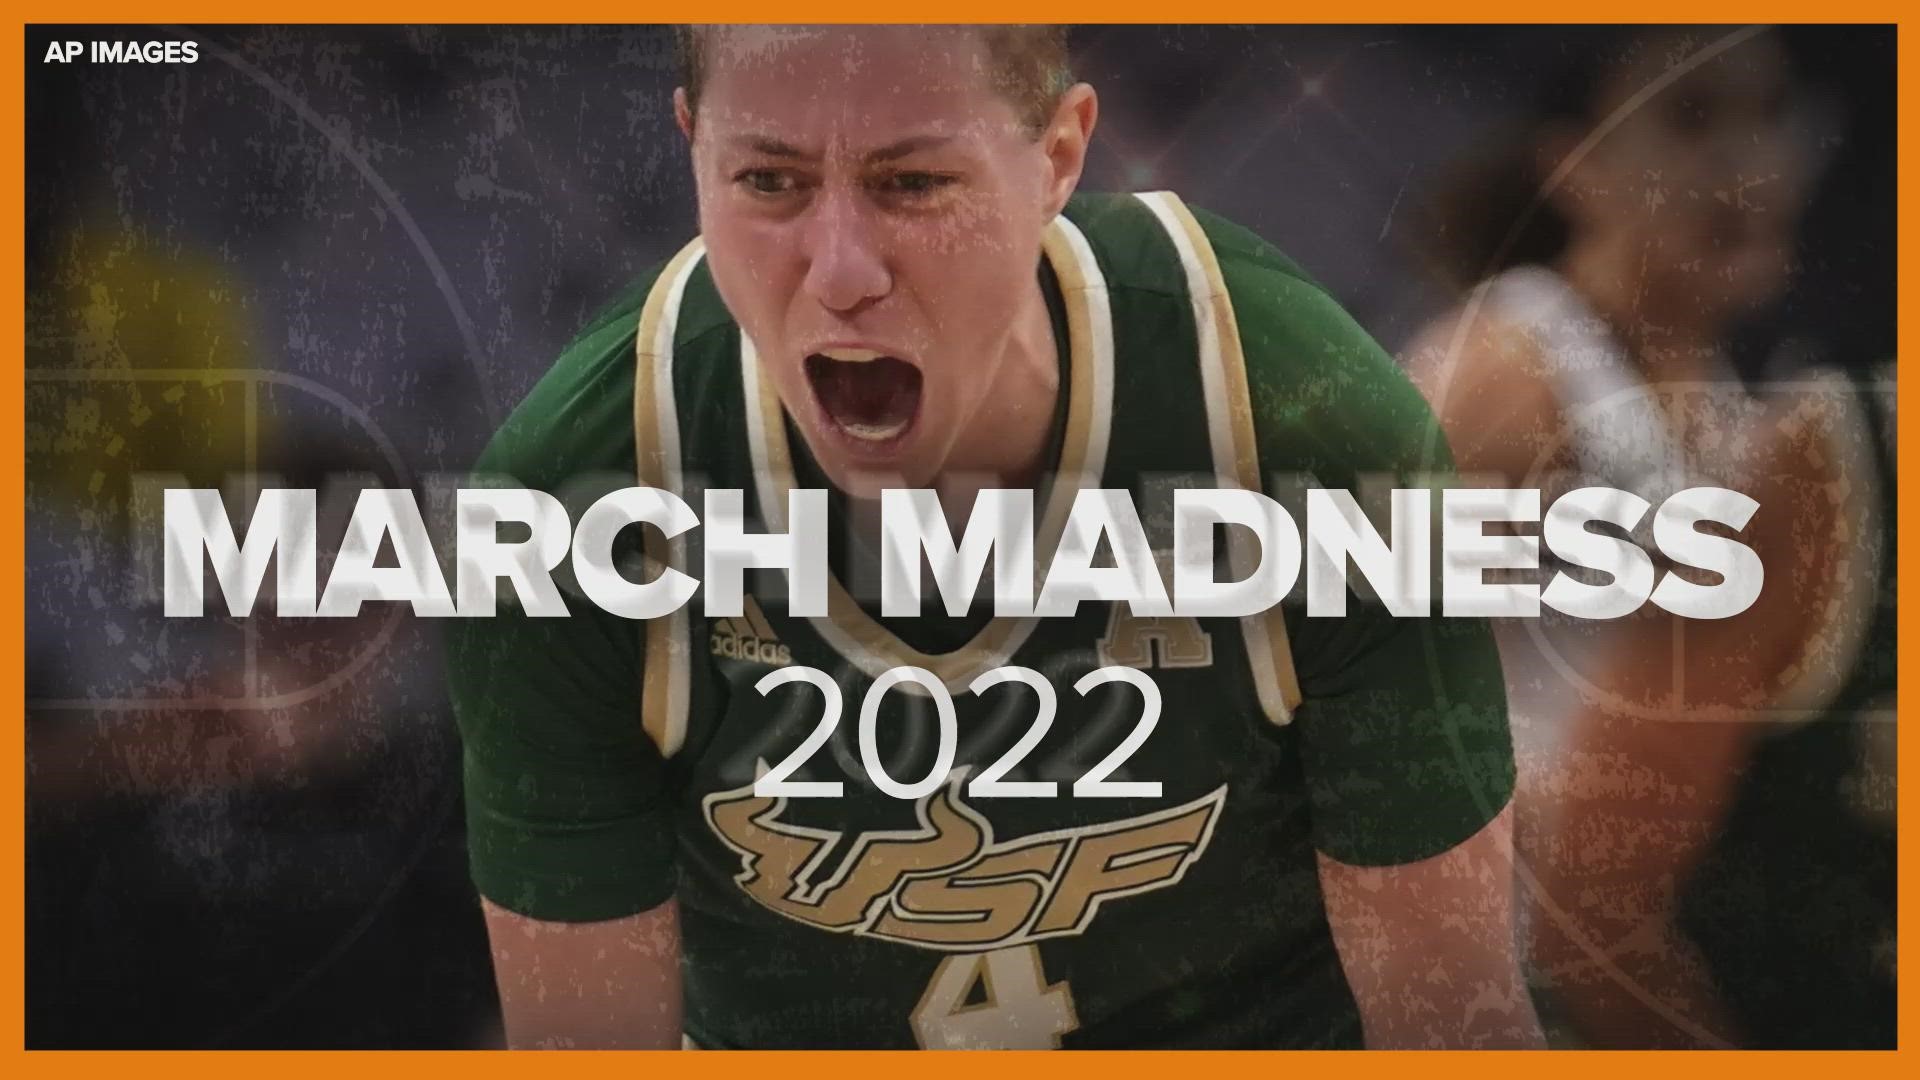 This will be the first year that the women's NCAA basketball tournament will also take on the "March Madness" branding.